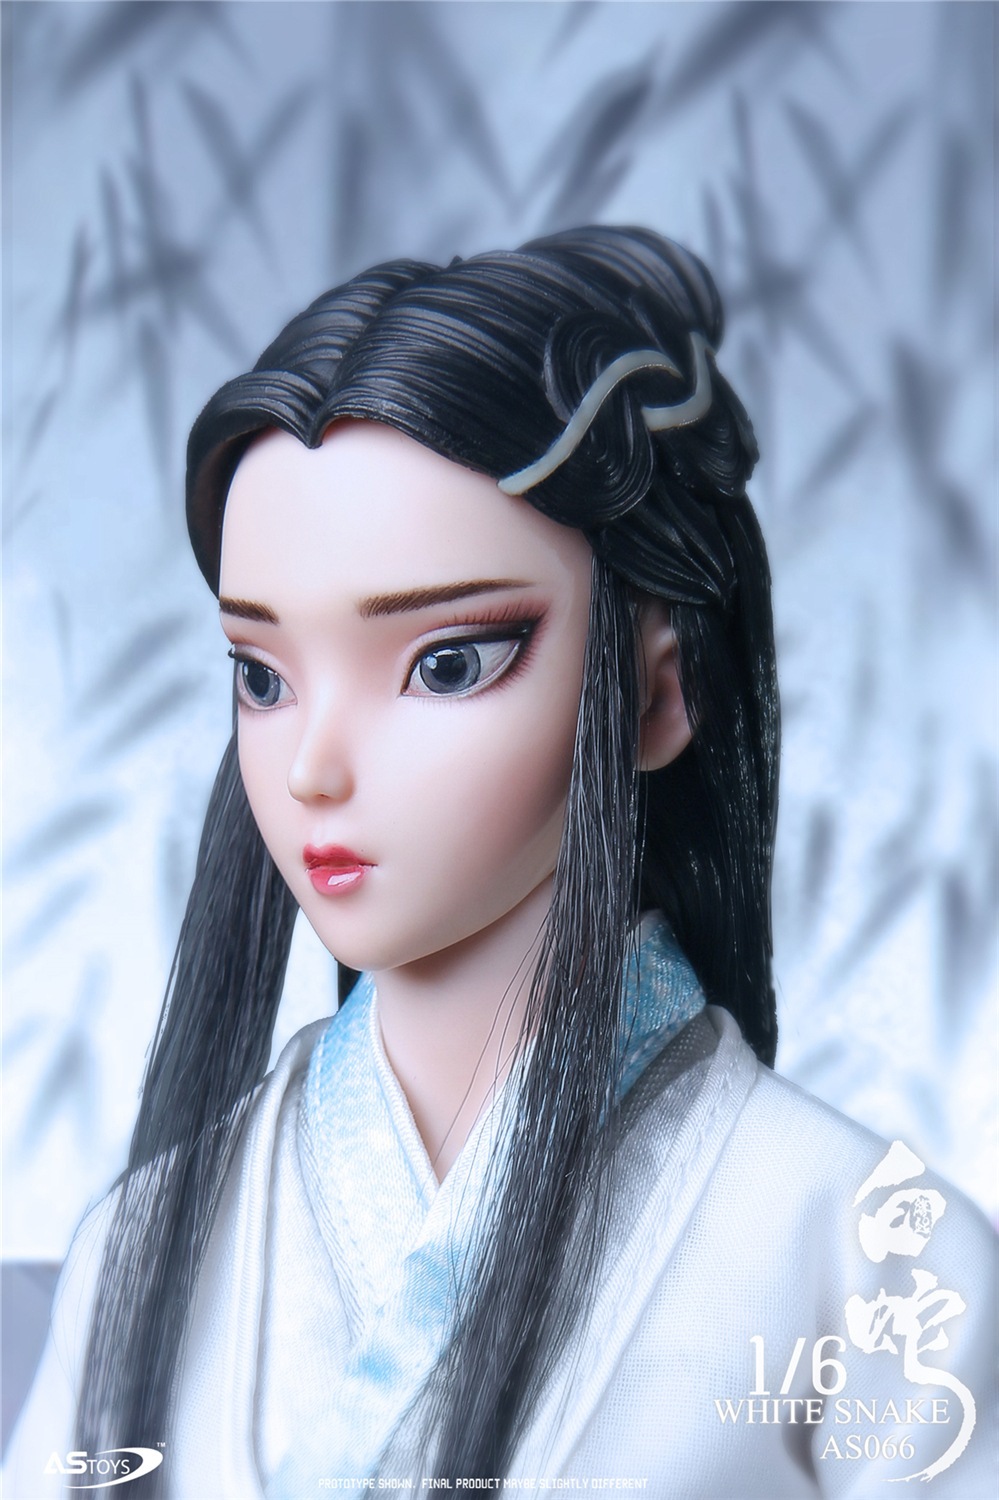 NEW PRODUCT: ASToys: 1/6 "White Snake" Action Figure #AS066 19104012